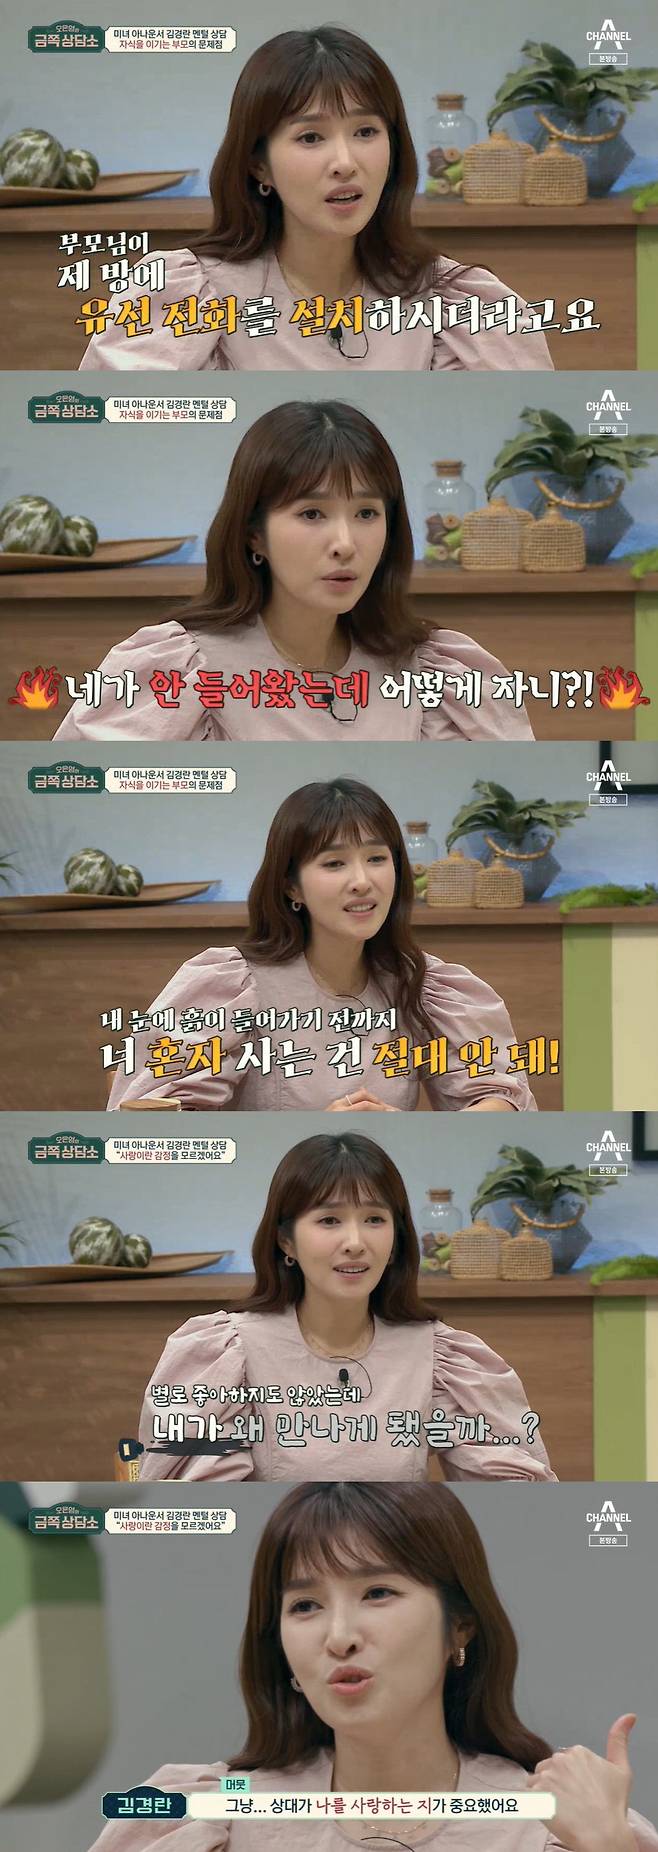 Kim Kyung-ran, a gold counselor, confessed that he had suffered many Erratums because he was not honest with his Feeling.Kim Kyung-ran, a KBS announcer, and former national goalkeeper Kim Byung-ji appeared as guests at the channel A entertainment program Oh Eun-youngs Gold Counseling Center broadcast on the 5th.The first customer was Kim Kyung-ran. Kim Kyung-ran, who said, One of the stories I heard a lot in my life was When will you break your frame.I do not know what the frame is, he said. I have a lot of poor sides and I can not speak well.I always lived nervously, but it seems to have been imprinted on it. Oh Eun Young asked about Kim Kyung-rans human relationship.Kim Kyung-ran said his relationship is narrow and deep style and that it is difficult to meet new people.Oh Eun Young asked if he had any experience of being hurt in human relationships, and Kim Kyung-ran said, There are many unfair things.Kim Kyung-ran said, I took a fashion picture, but it was a long dress without exposure.I heard a senior behind me saying, Does kids want to get out like that these days? He became a kid who wanted to get out of sleep.Not just this: Kim Kyung-ran said: I fell well and have a lot of wounds on my knees and arms.I went to the production presentation without casual stockings, and I got a full-length picture, and when I saw my leg, I said something enormous.I have a bad personality because I have not been marriage for a long time. Thats what formed me. So I did not show it and I became more shrinking. Kim Kyung-rans hardship with such misunderstandings was also influenced by childhood.Kim Kyung-ran said that after being outcast in elementary school, his personality changed completely. I was a good speaker, but it was too hard for people to look at me.I was sweating my hands when I read Korean books. There was no way to break through it. If I live honestly without flaws, I will know someday.Kim Kyung-rans parents were quite strict; Kim Kyung-ran said: My parents had to know all my every move.When I passed Busan MBC, my parents installed a landline phone in my room. I got the call and the day was over. I had to go home in 20 minutes when I was on the radio at 2 oclock.Im getting calls from my parents in twenty-seven or thirty minutes. Its safe. Im locked in.He told me not to broadcast that I couldnt sleep because I wasnt coming in. I thought I needed separation.Even so, I had to do Korean independence movement at 37 years old.Kim Kyung-ran regretted, If I had been subjective faster, I would not have finished Erratum quickly.Kim Kyung-ran said he did not know about his favorite Feeling because of the influence. If someone liked me, I gave a lot of added points.I was dragged around without asking about my Feeling. I didnt think I liked him. I wondered why Id met him.I do not think I know. Jung Hyung-don, who heard this, carefully asked, Is not it marriage because I love you? Kim Kyung-ran said, I gave a very high value to express my mind that I will not change.I thought I might not have known about my mind and had been going on. I thought back and it was important if my opponent loved me.I do not know what Feeling I should believe in if I love this person. Kim Kyung-ran was immediately a marriage article without a romance story: Kim Kyung-ran revealed that she was afraid to get into a private life as a female announcer.Kim Kyung-ran also revealed that there was a lack of emotional exchanges about marriage life; Kim Kyung-ran said: I tried hard to understand but I couldnt.I did not know my Feeling too much, I did not know it to myself. Oh Eun Young said, There is no wrong mind.I do not have to ask if I am right, he advised, saying that practice is needed to express Feeling.